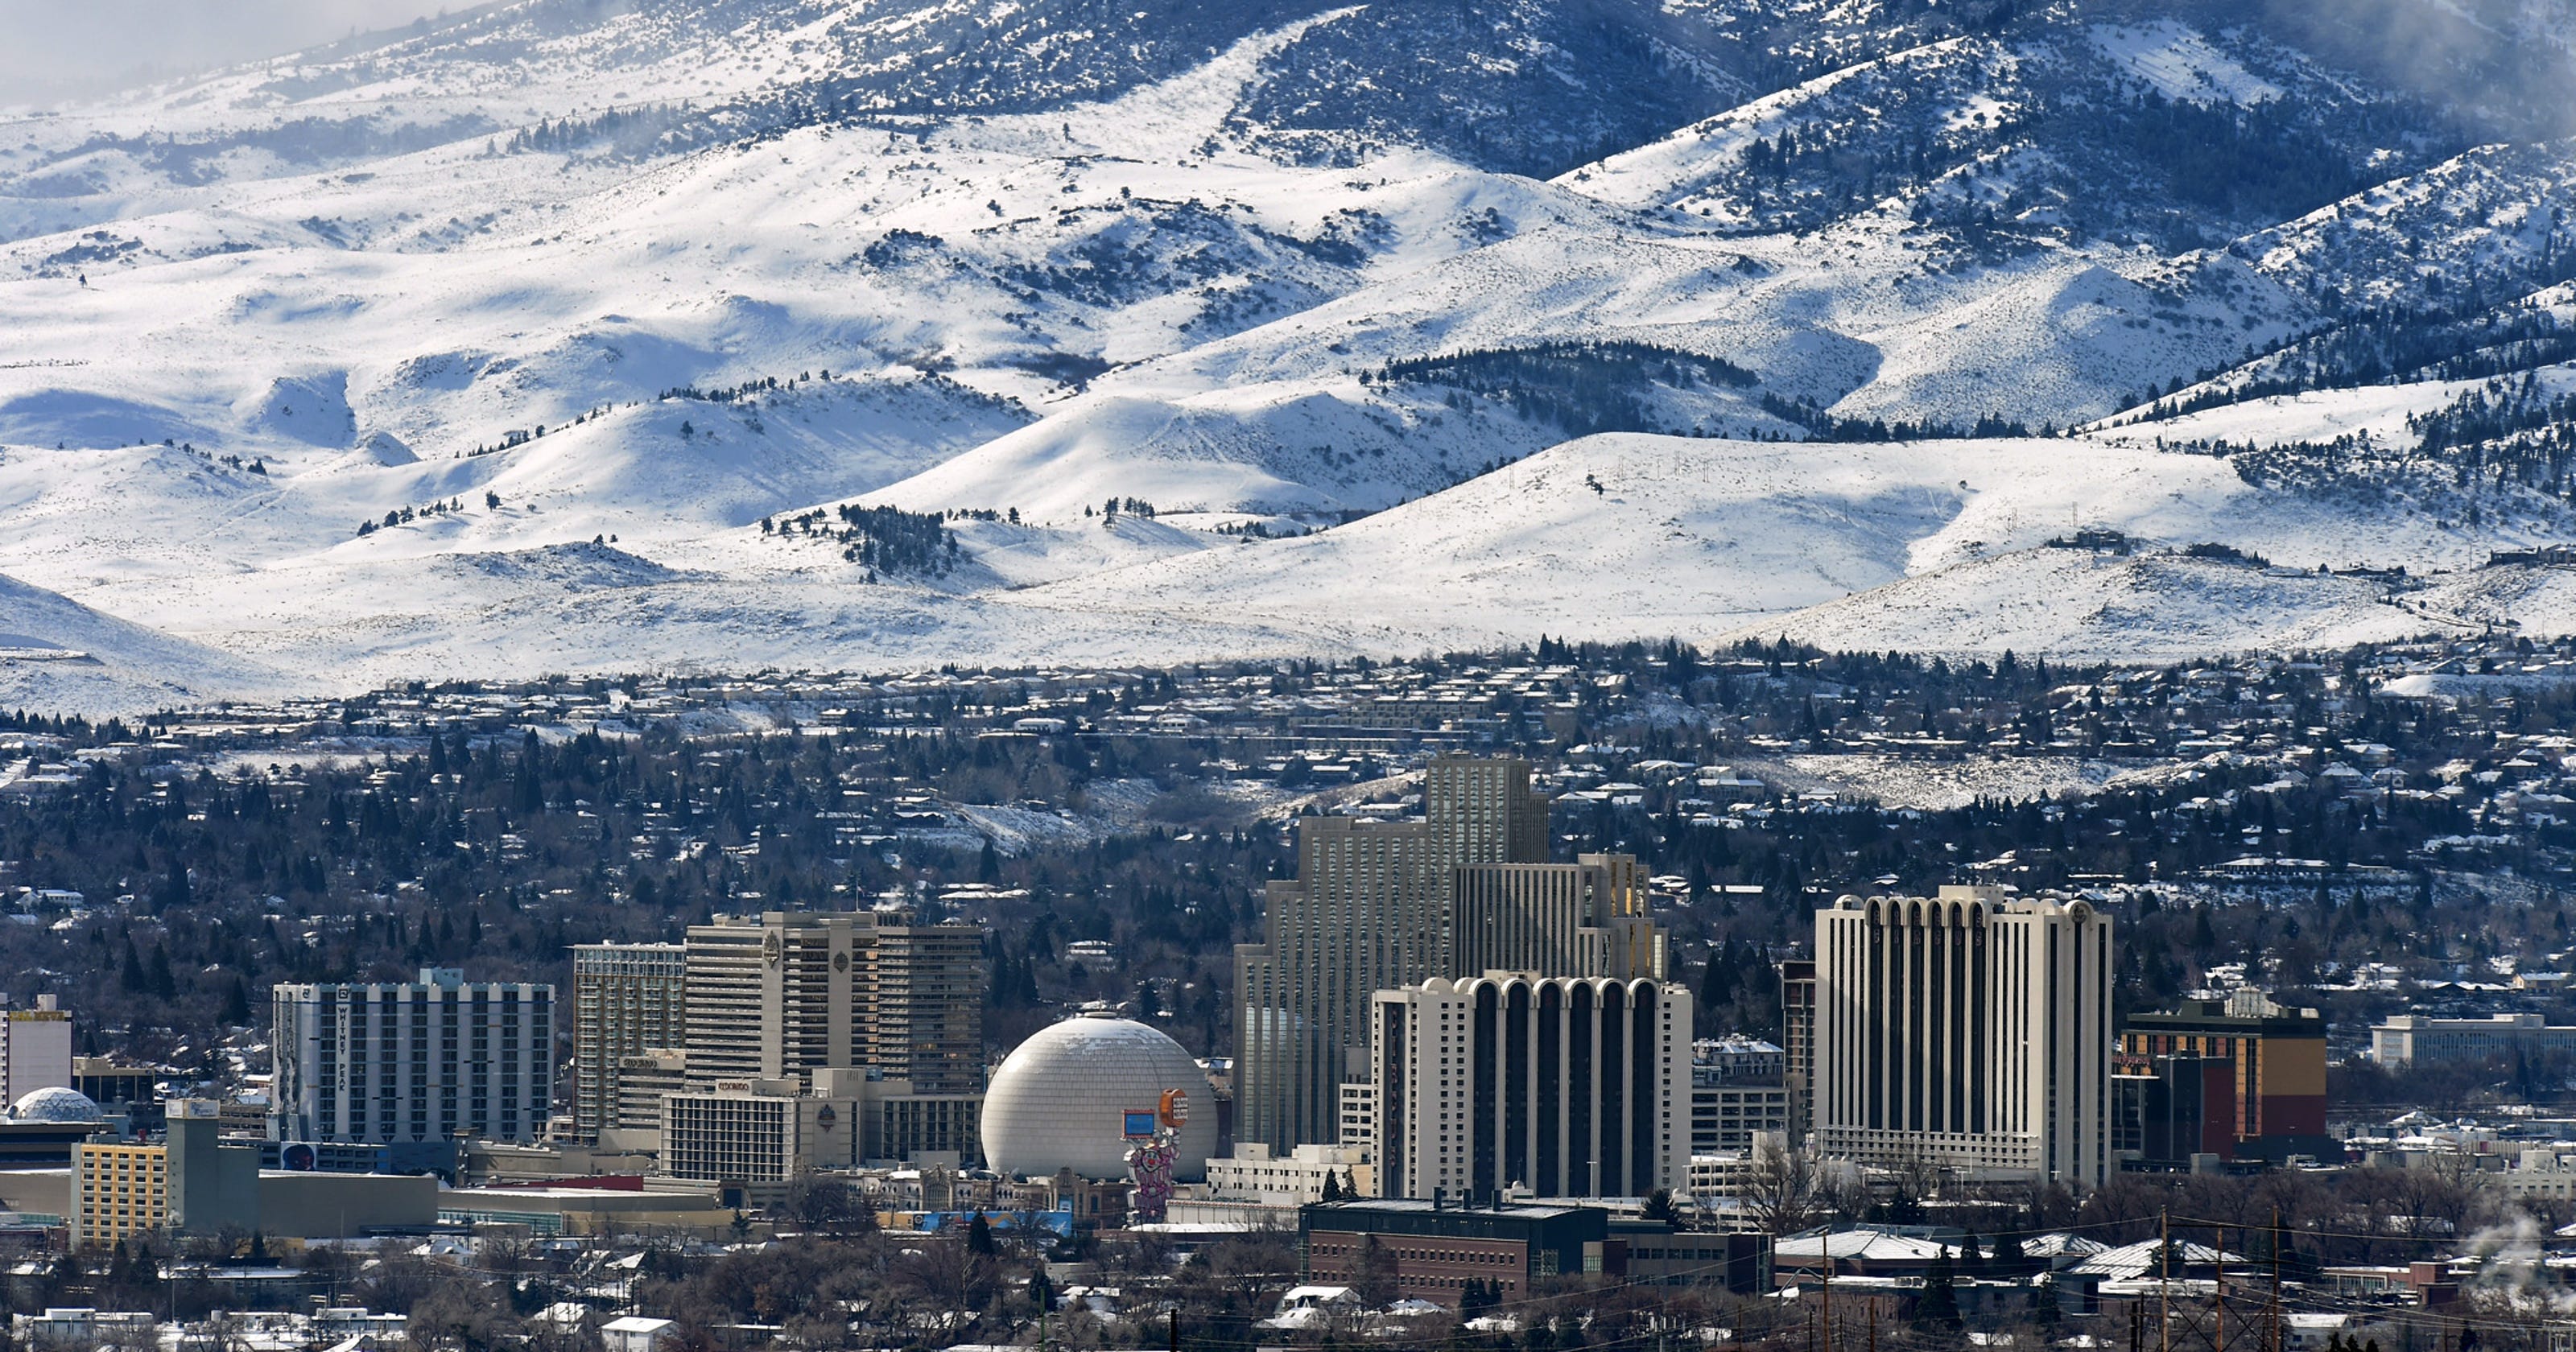 Reno finally gets a break from gloomy, cold weather this weekend